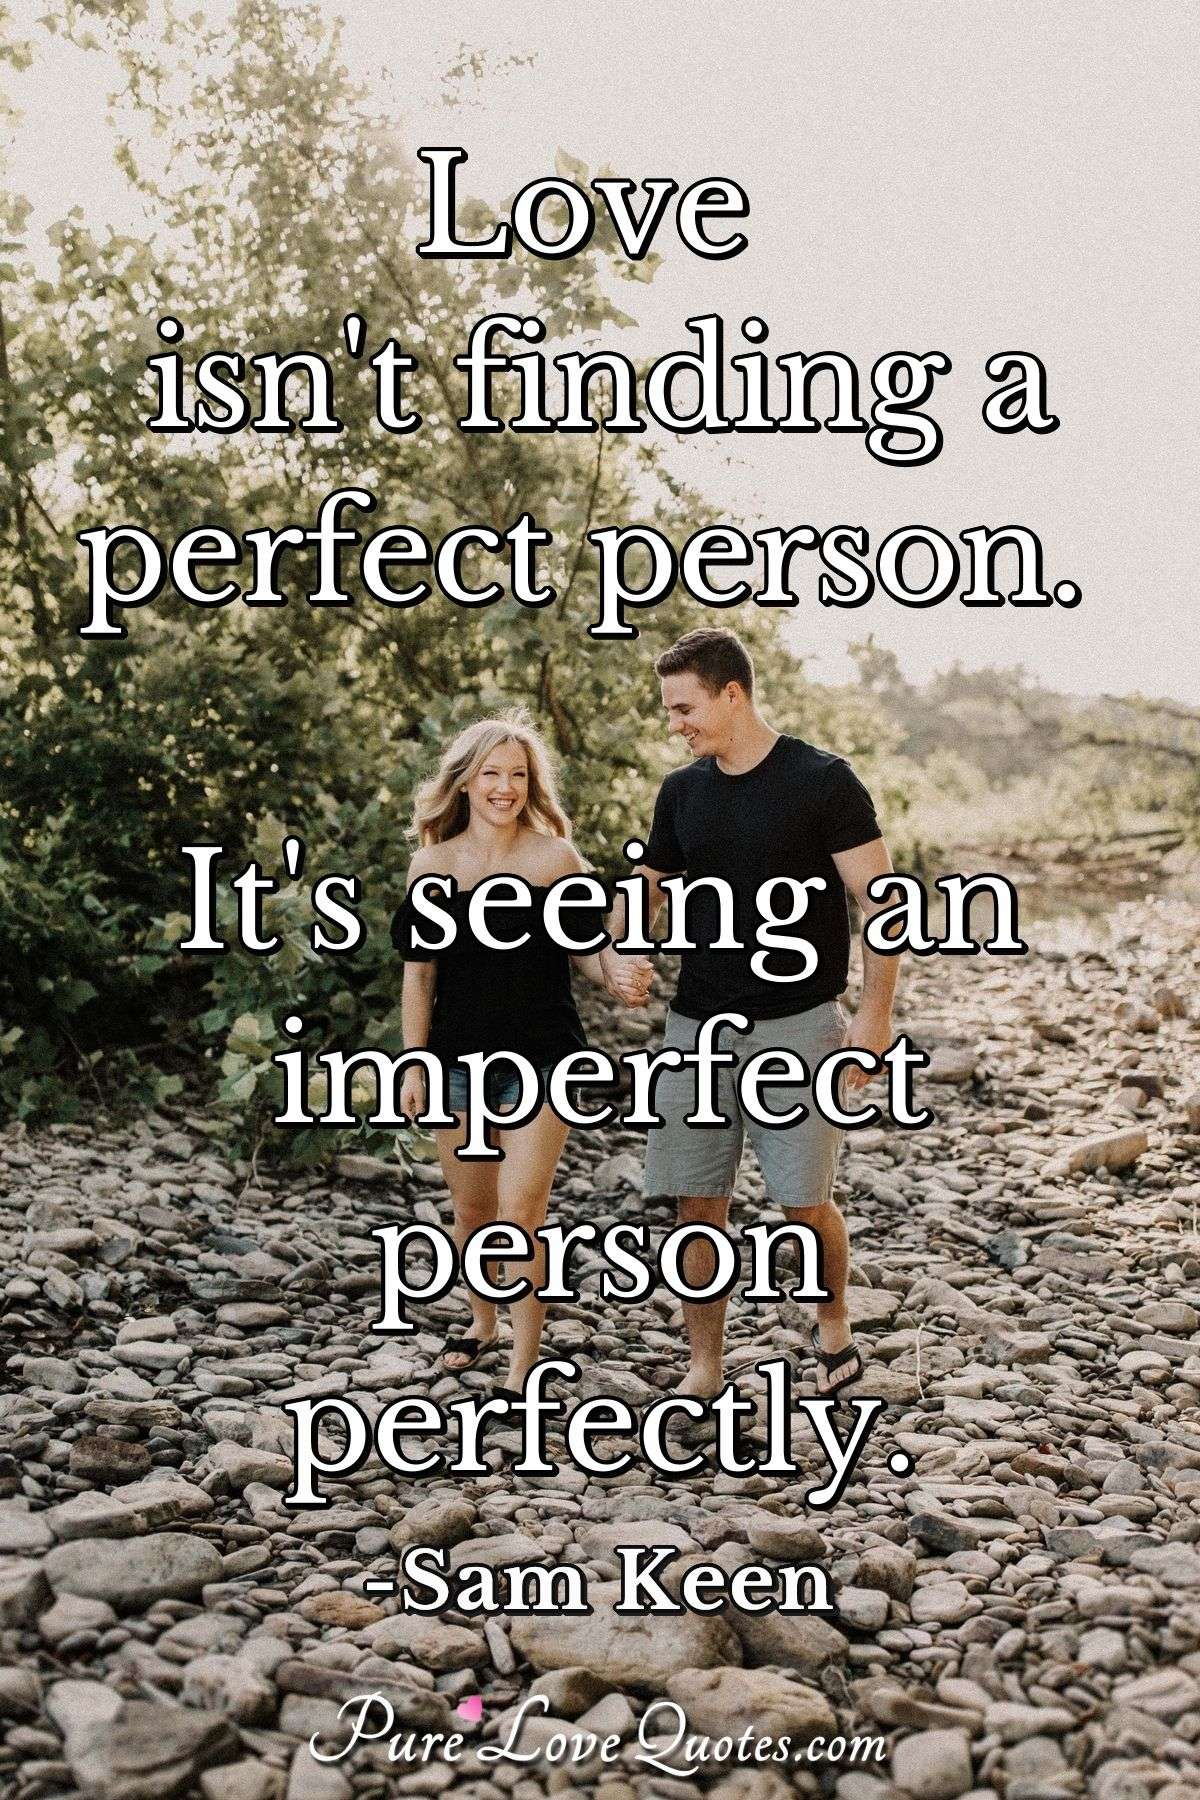 Love isn't finding a perfect person. It's seeing an imperfect person perfectly. - Sam Keen